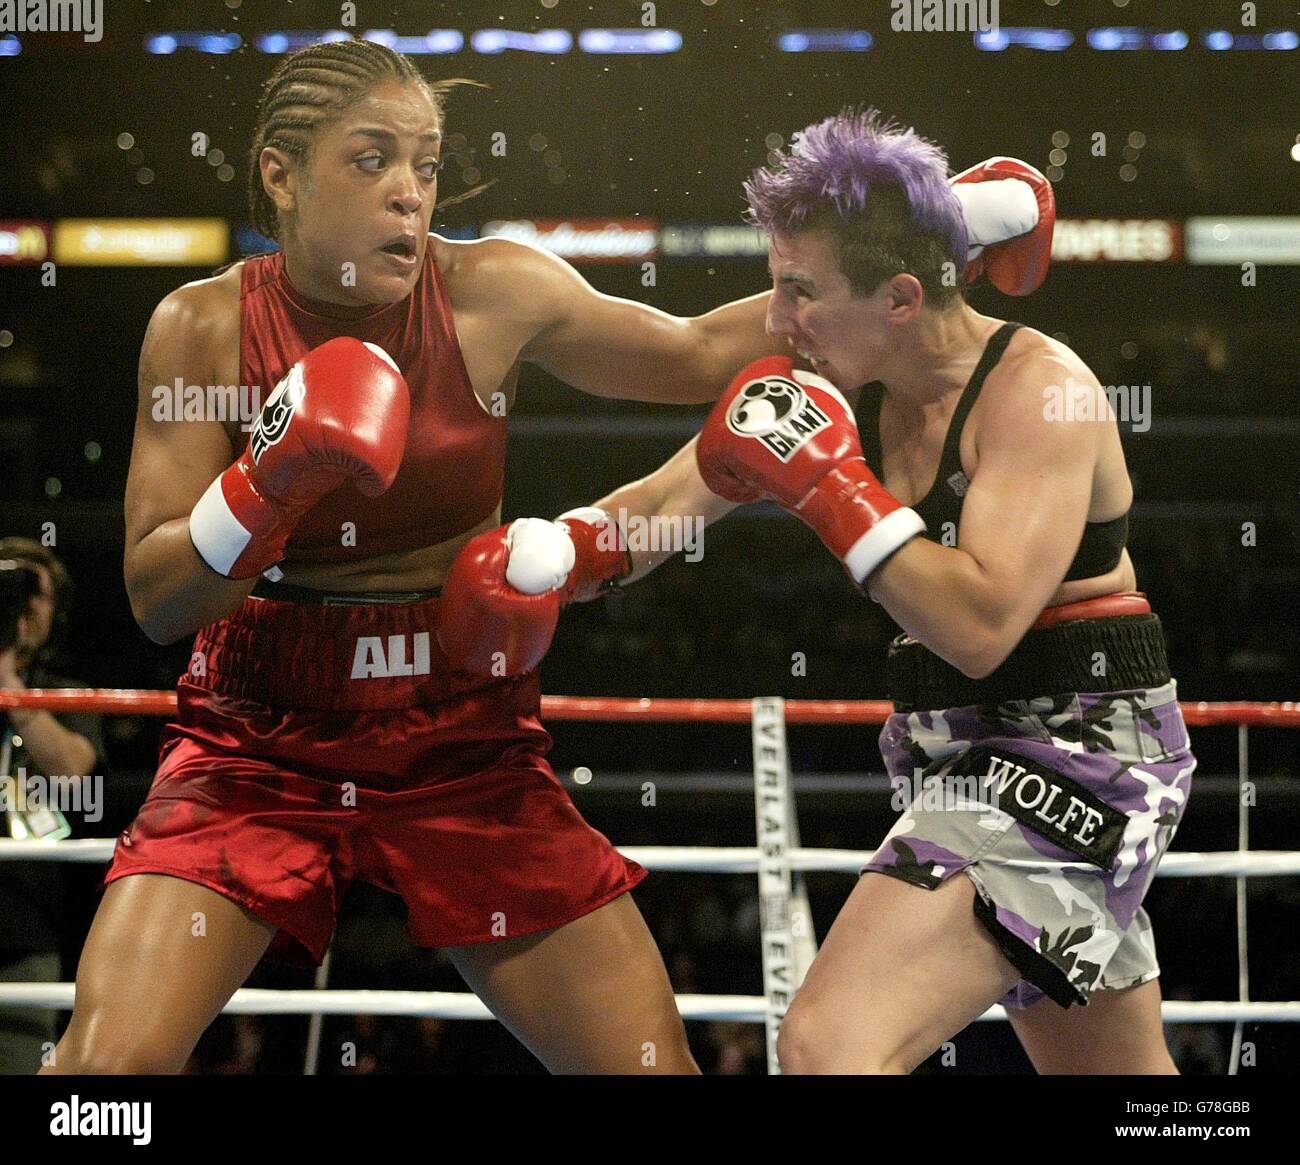 Muhammed Ali daughter Laila Ali (left) during her TKO 6th round victory over Valerie Mahfood, at Super-Middleweight at the Staples Centre Arena in Los Angeles. Stock Photo